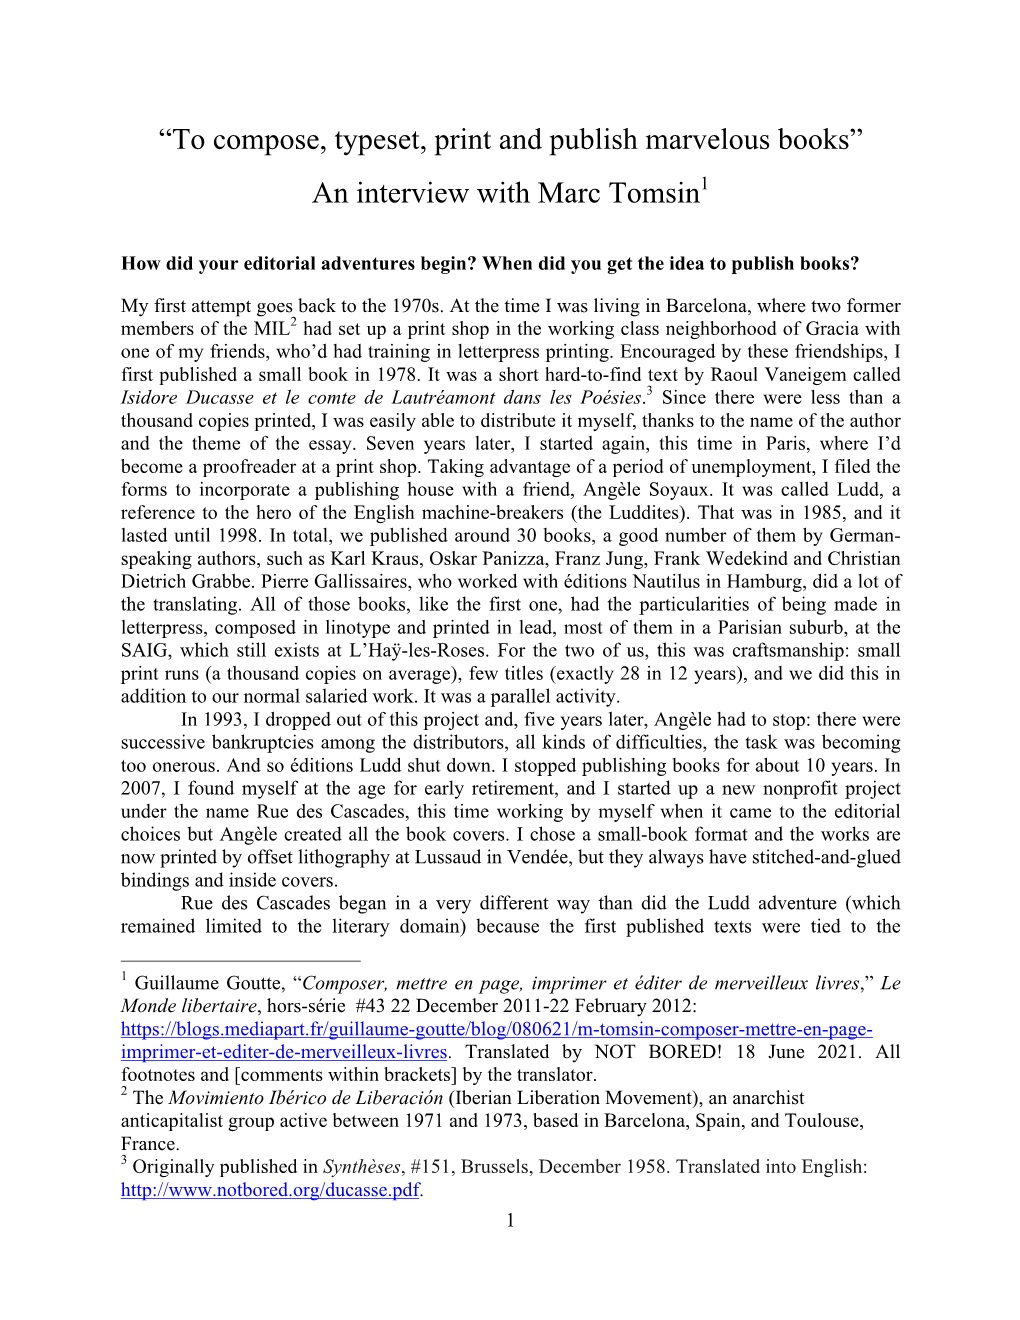 An Interview with Marc Tomsin